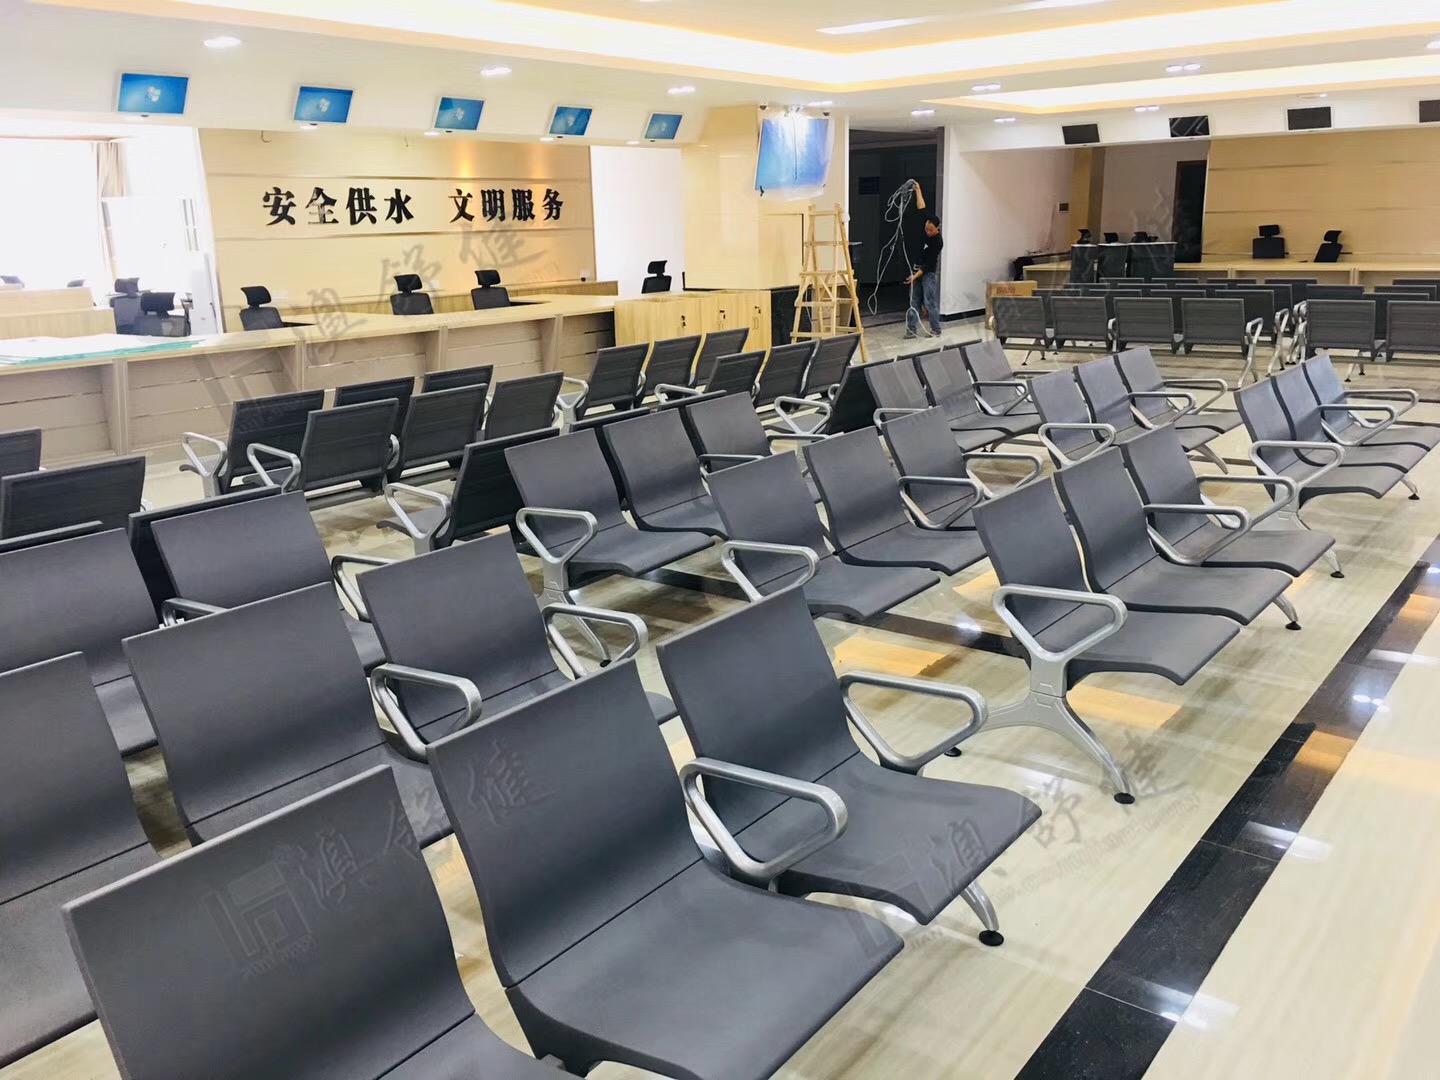 Shunde administrative service center waiting seating project(图2)